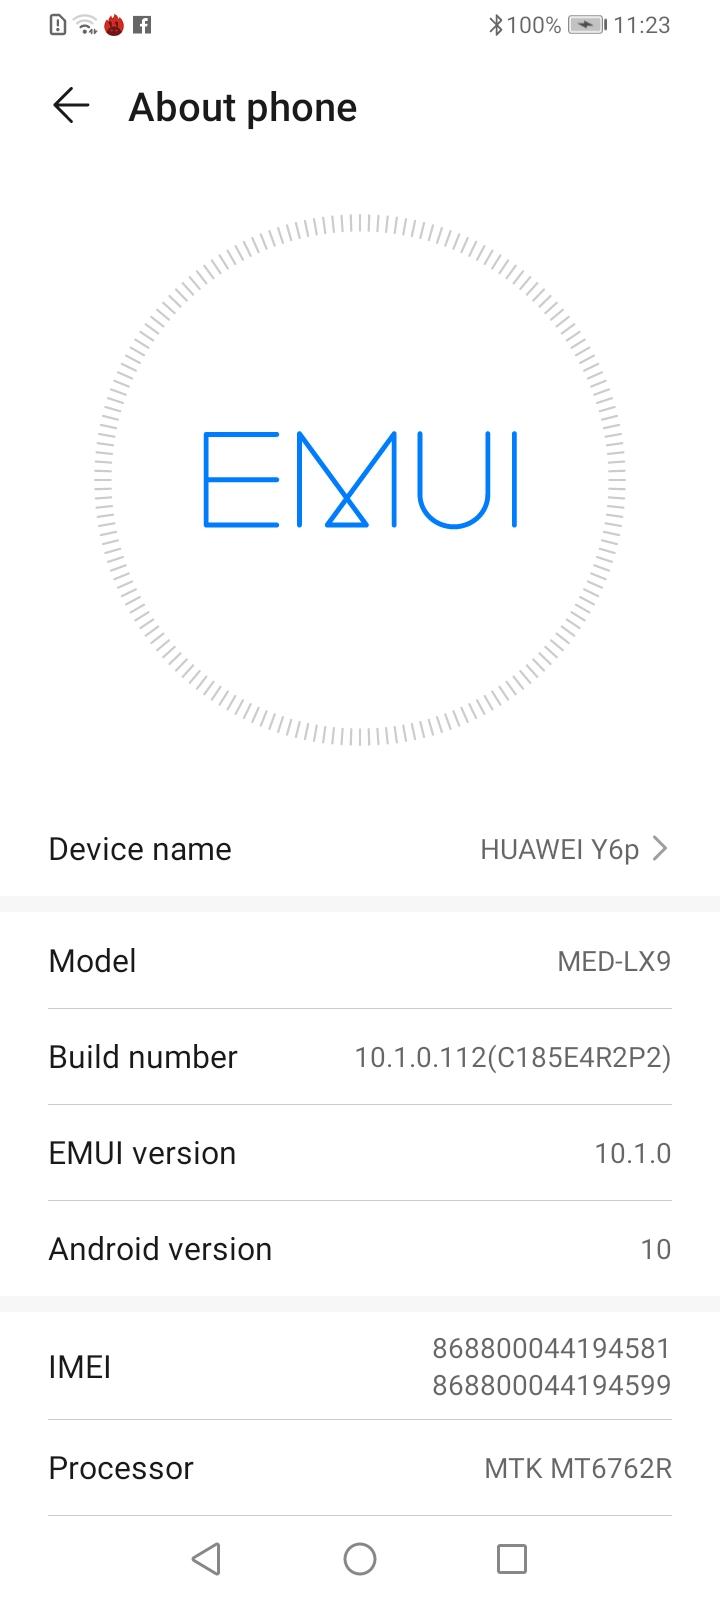 About Huawei Y6p